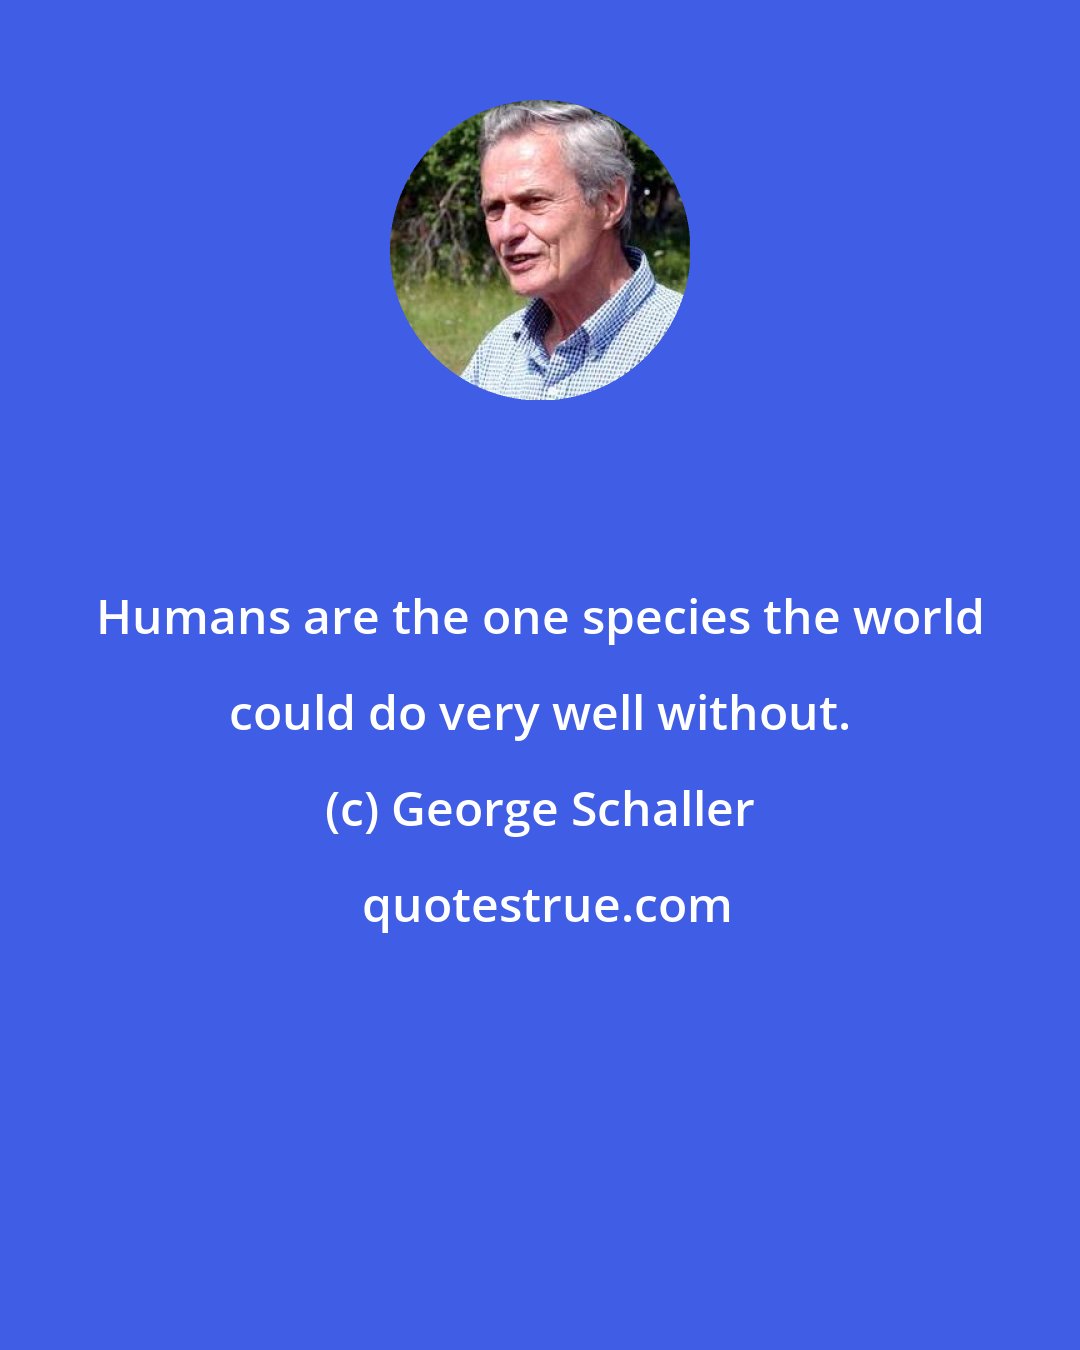 George Schaller: Humans are the one species the world could do very well without.